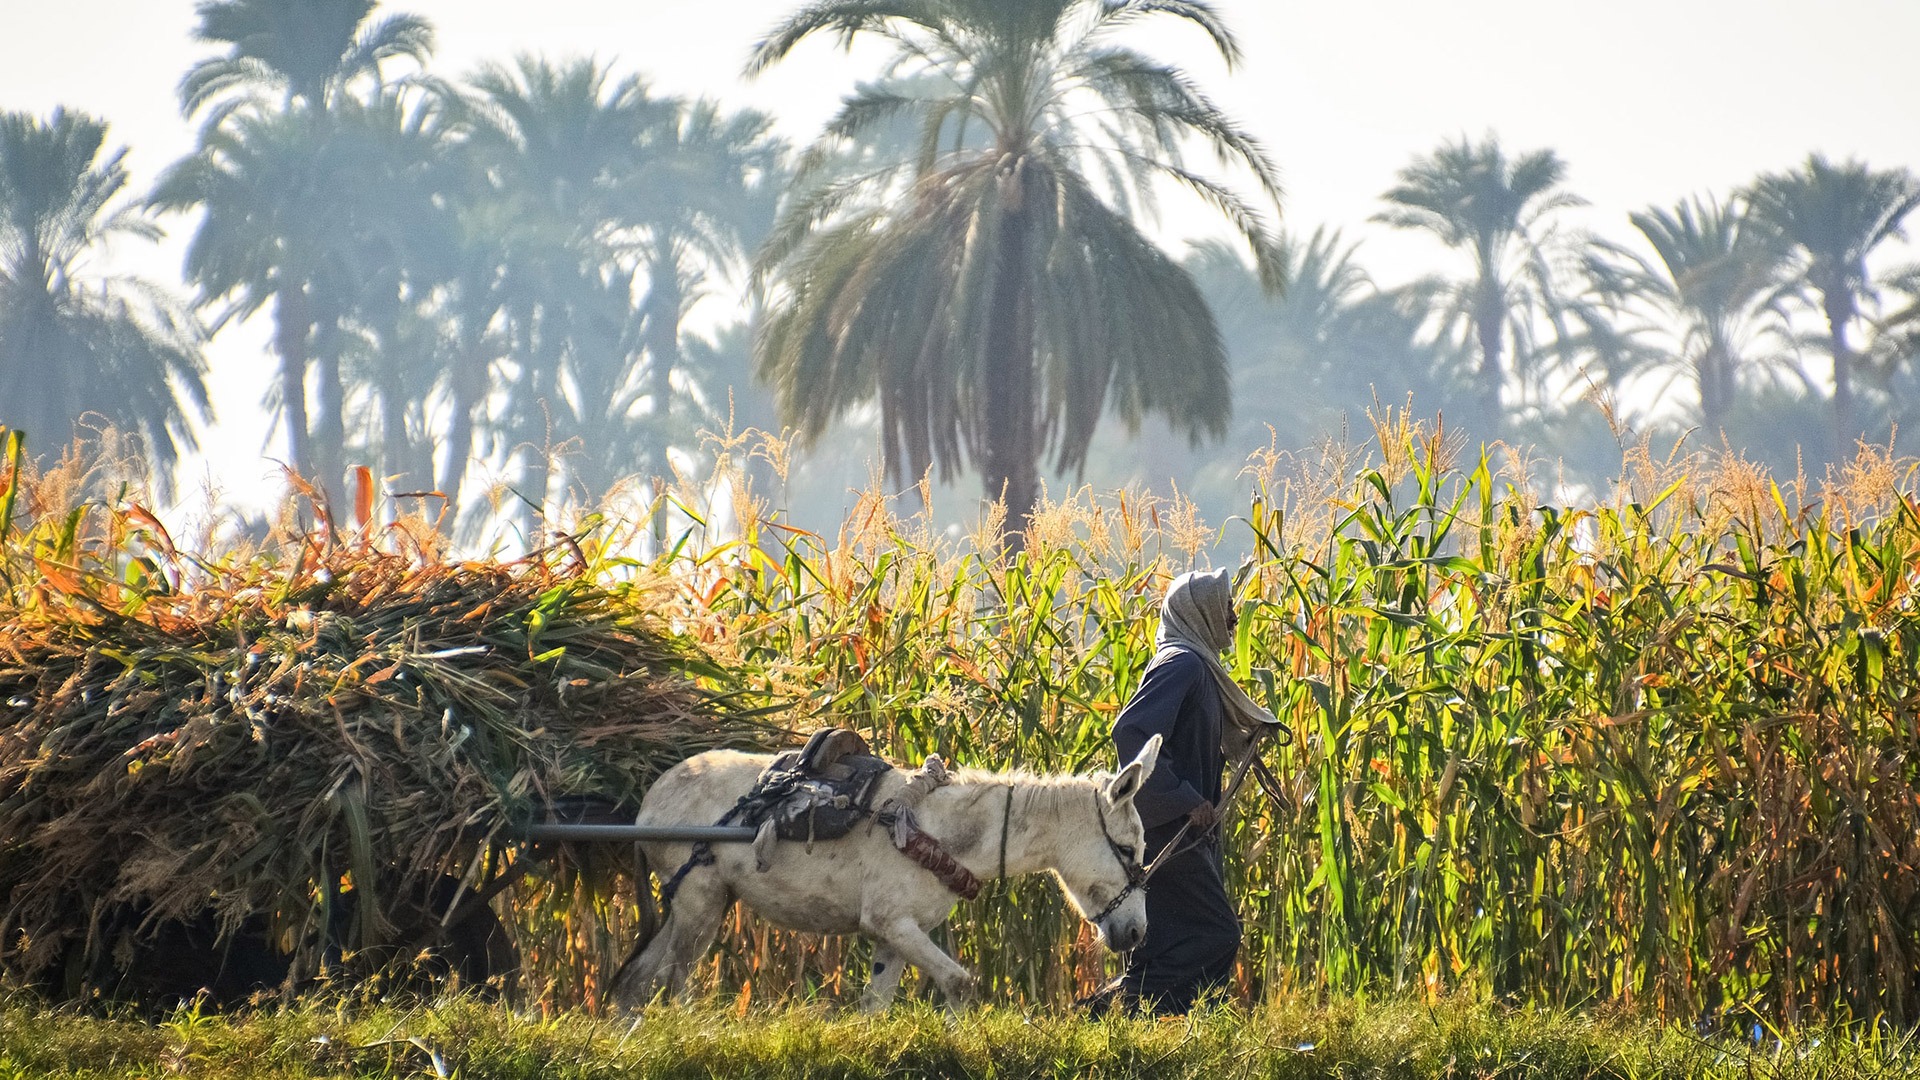 Farmer working his fields along the Nile River, Egypt